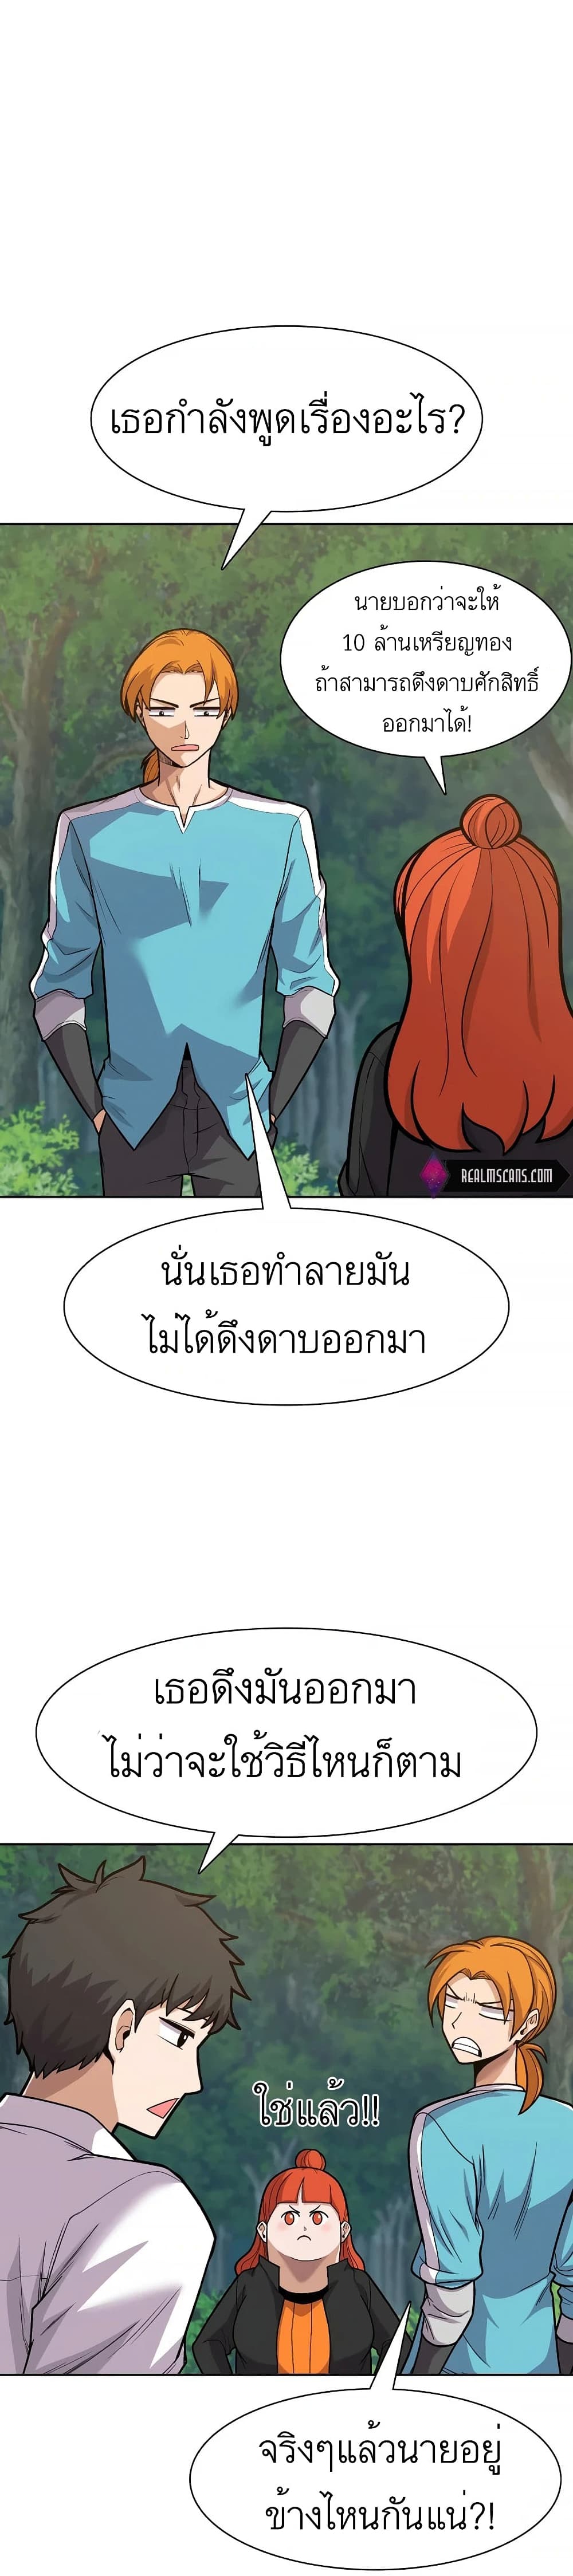 Raising Newbie Heroes In Another World ตอนที่ 13 (17)